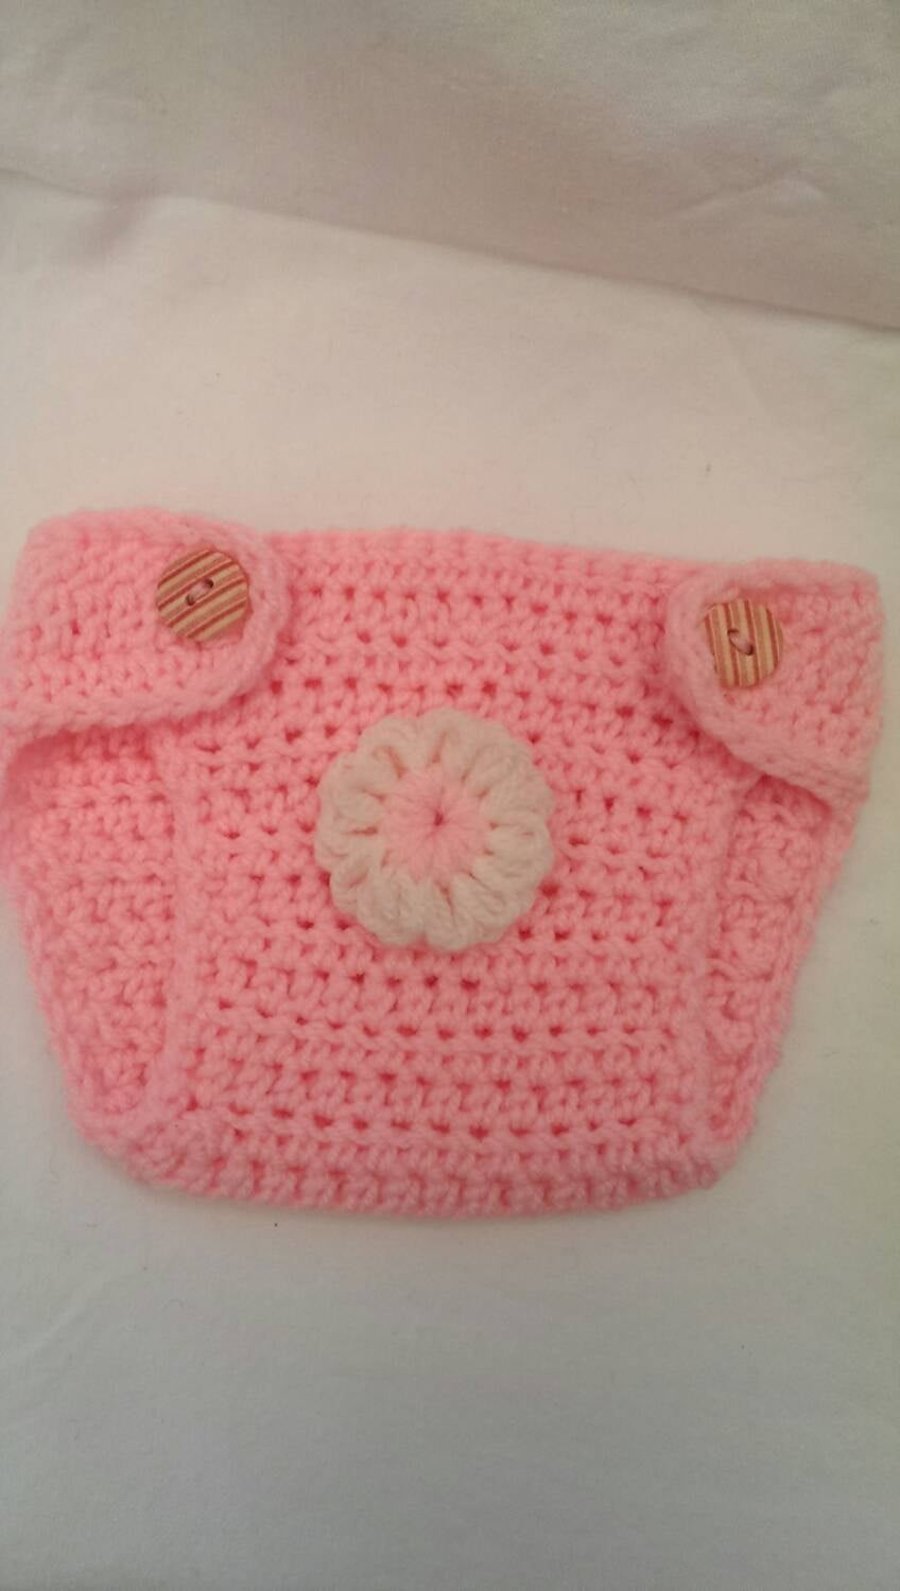 Diaper Cover, Baby Girl Diaper Cover, Baby Pink, Cream, Nappy Cover